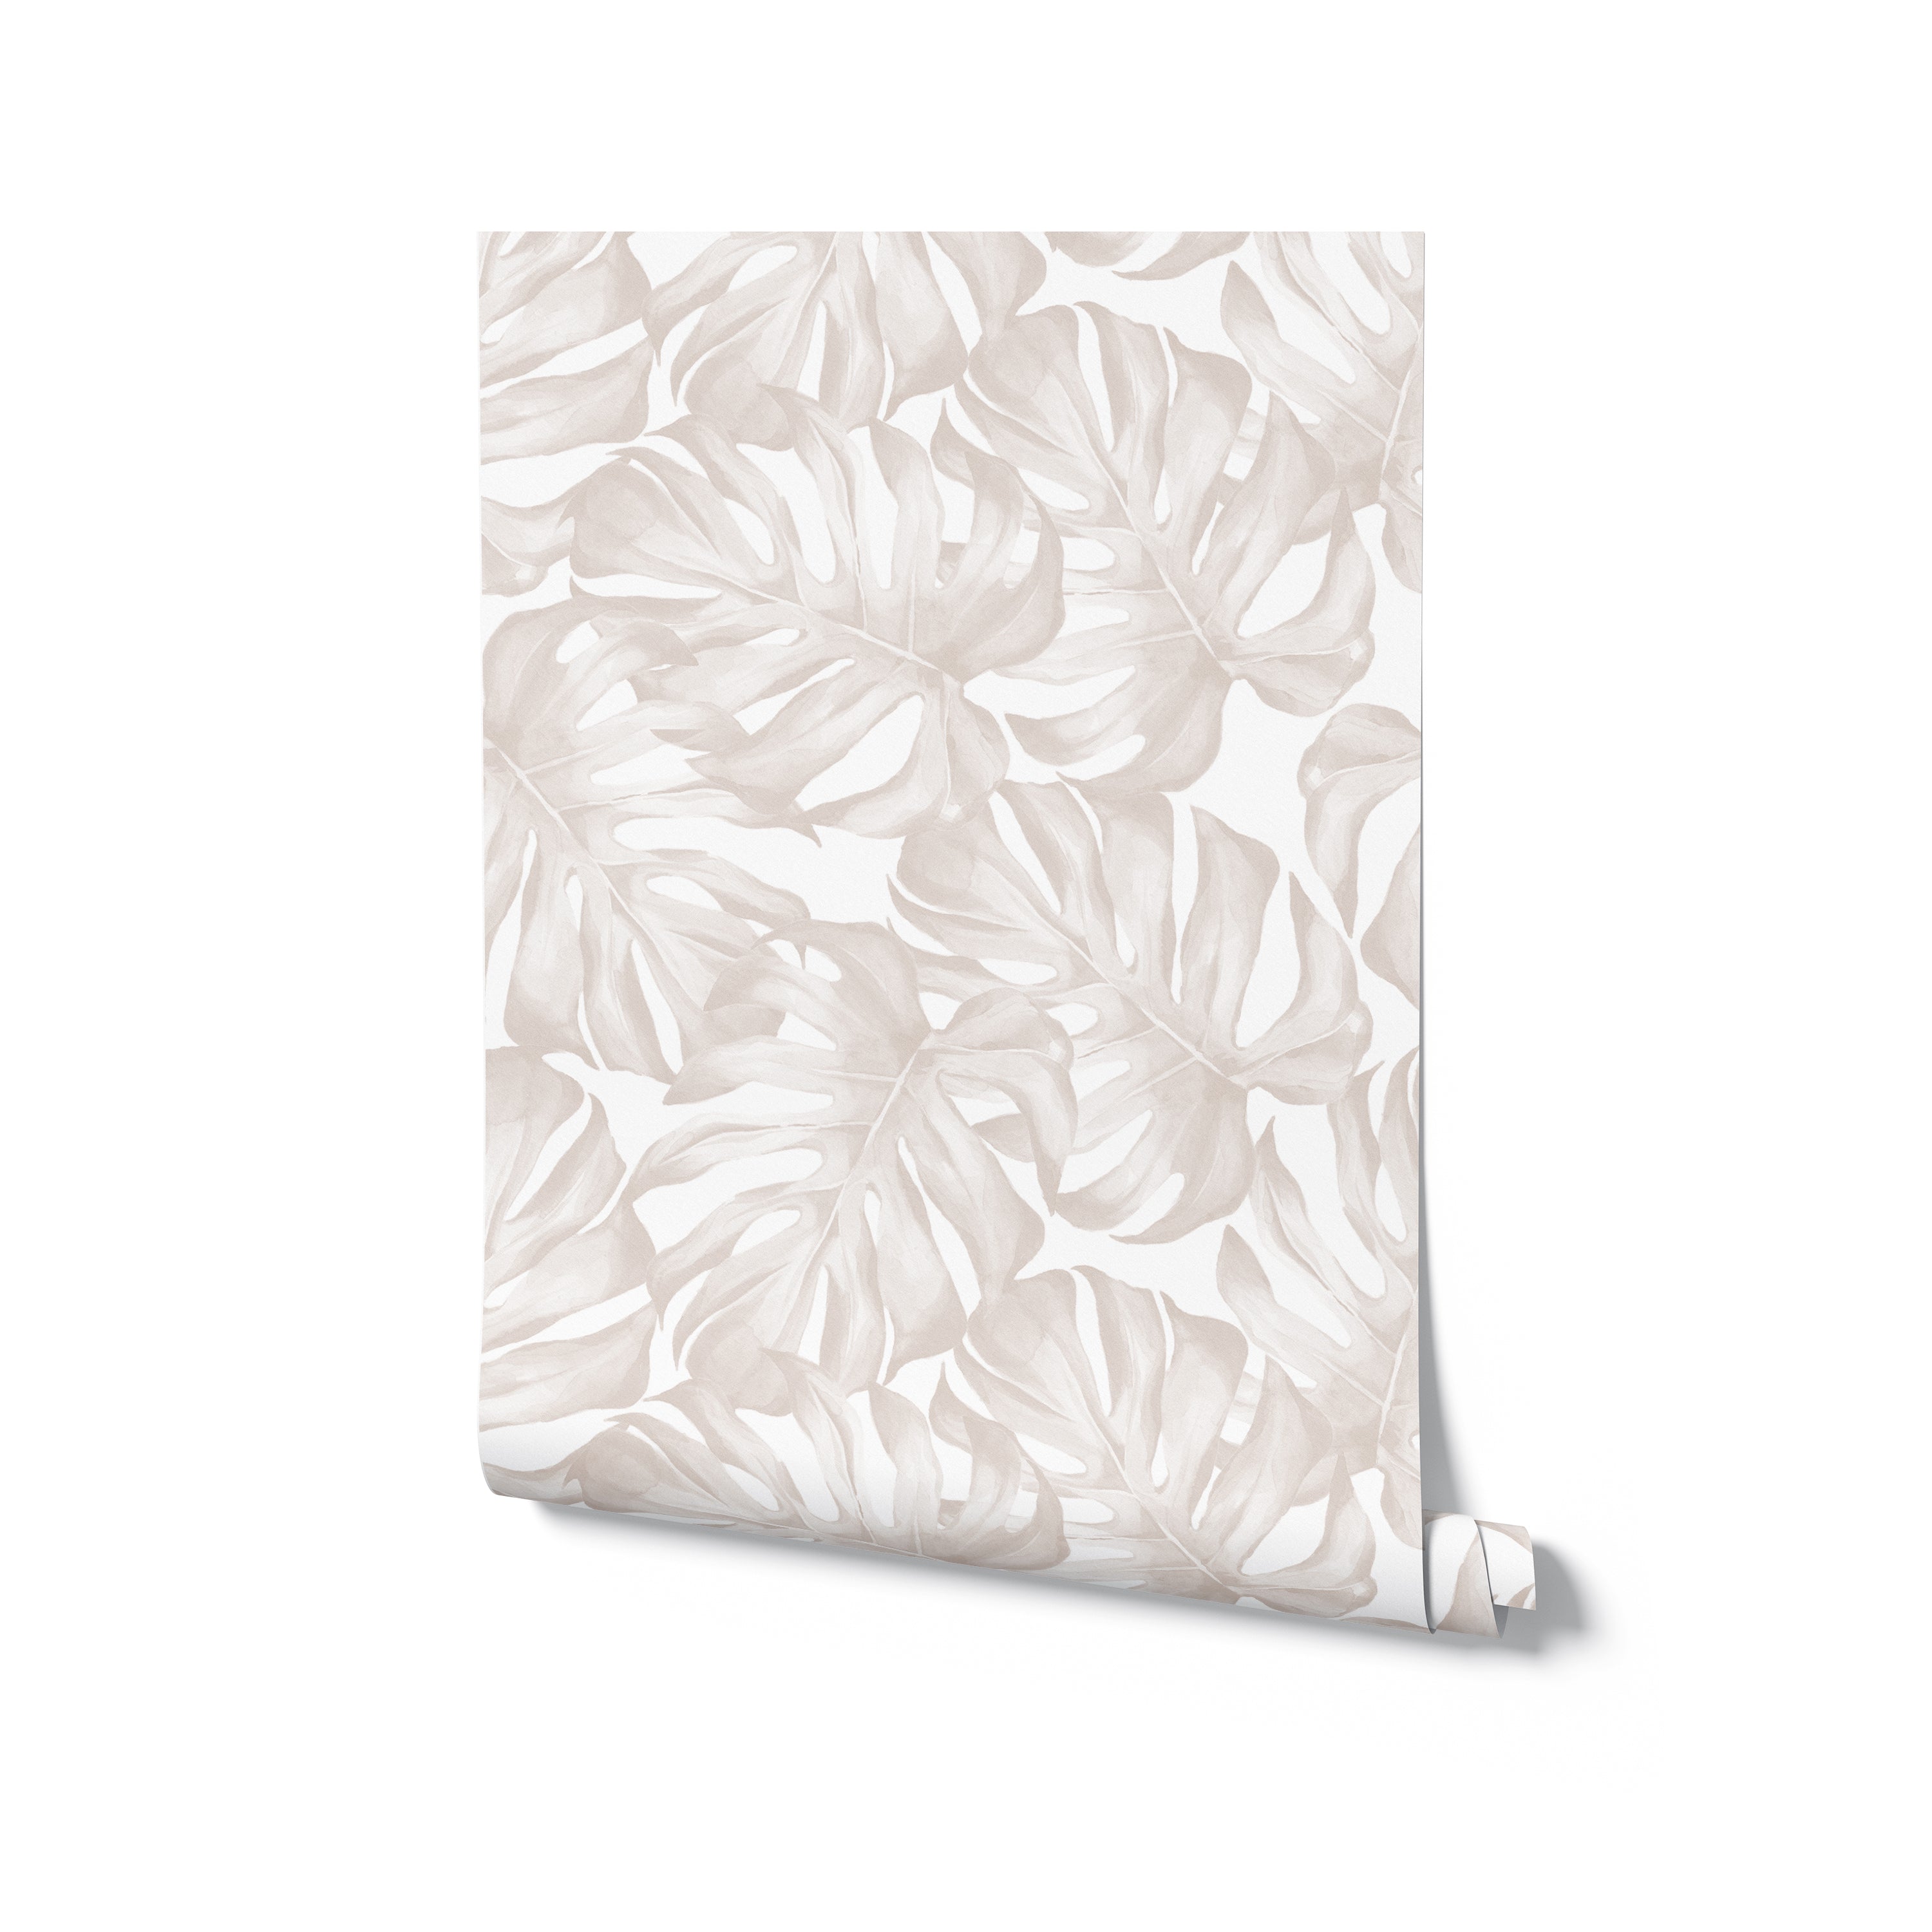 A square image presenting a rolled-up piece of wallpaper with a monstera leaf design, emphasizing its texture and watercolor-like aesthetic. The soft gray and white hues of the leaves provide a modern and elegant feel, with the roll resting against a plain backdrop to highlight the pattern.